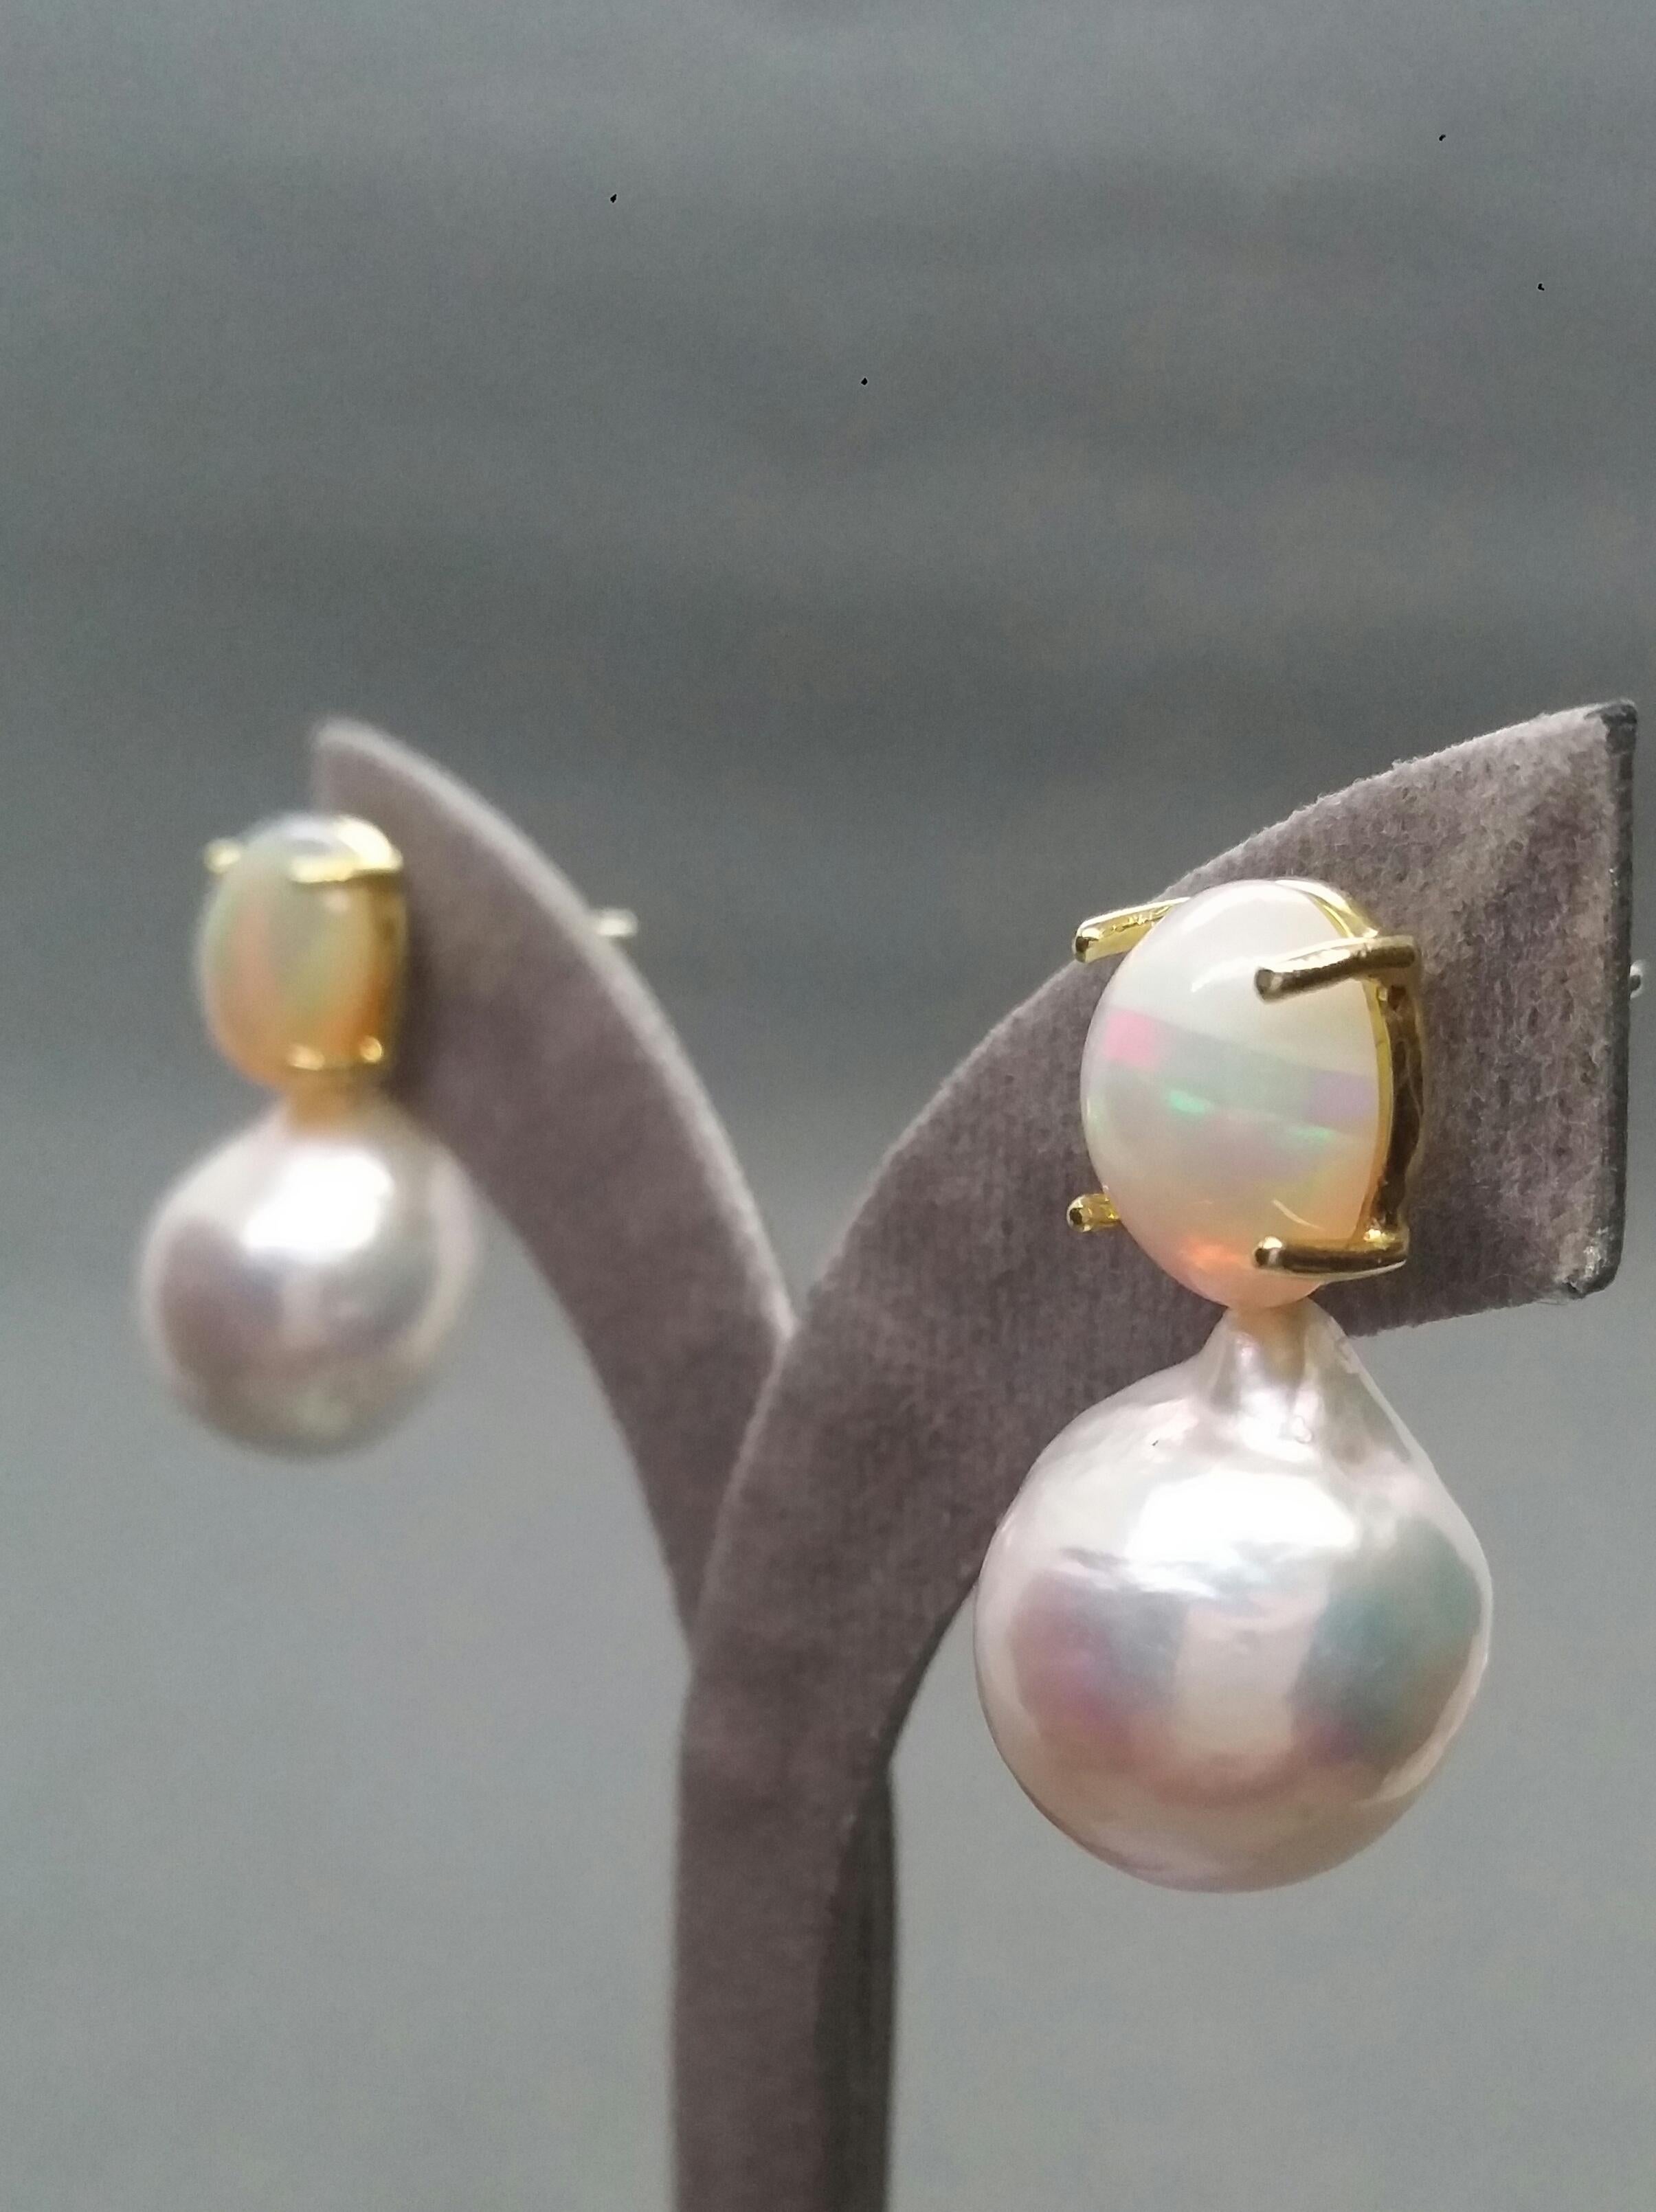 Big Size White Baroque Pearls Oval Solid Opal Cabochons Yellow Gold Earrings 2